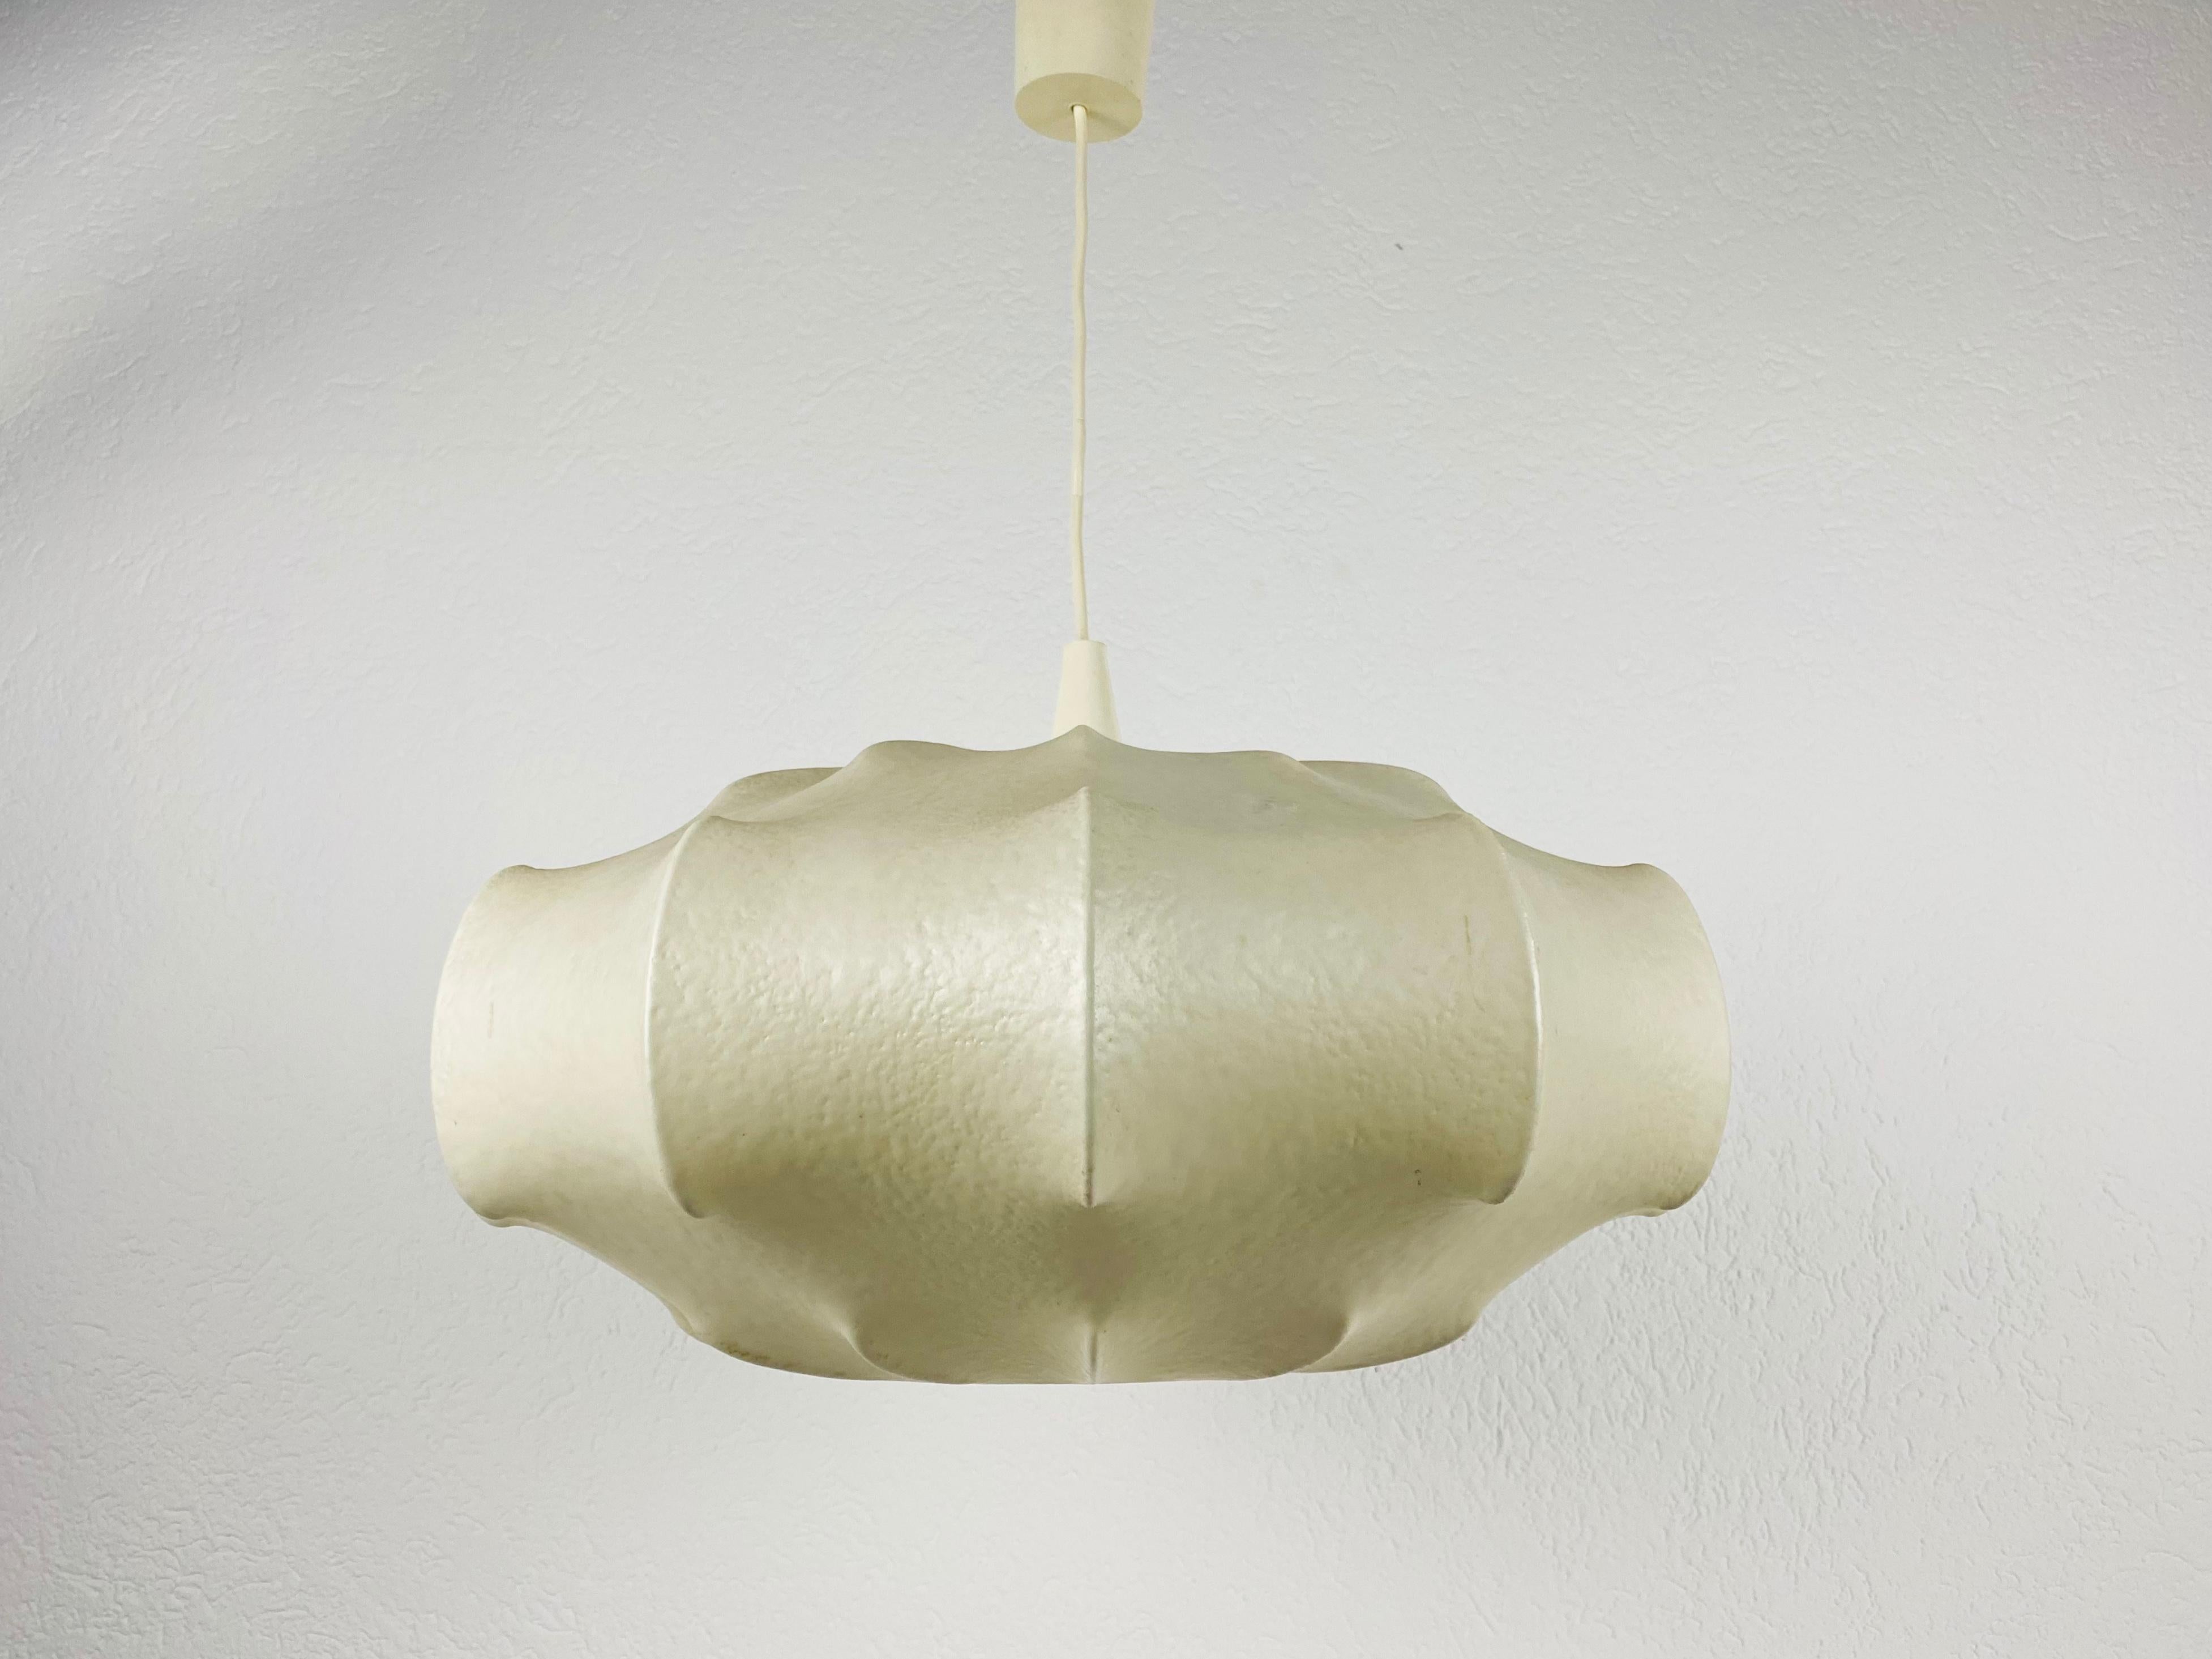 A cocoon pendant lamp made in Italy in the 1960s. The hanging lamp has a design similar to the lightings made by Achille Castiglioni. The lamp shade is of original resin and has a flower shape.

Measures: Height 25-70 cm 
Diameter 52 cm

The